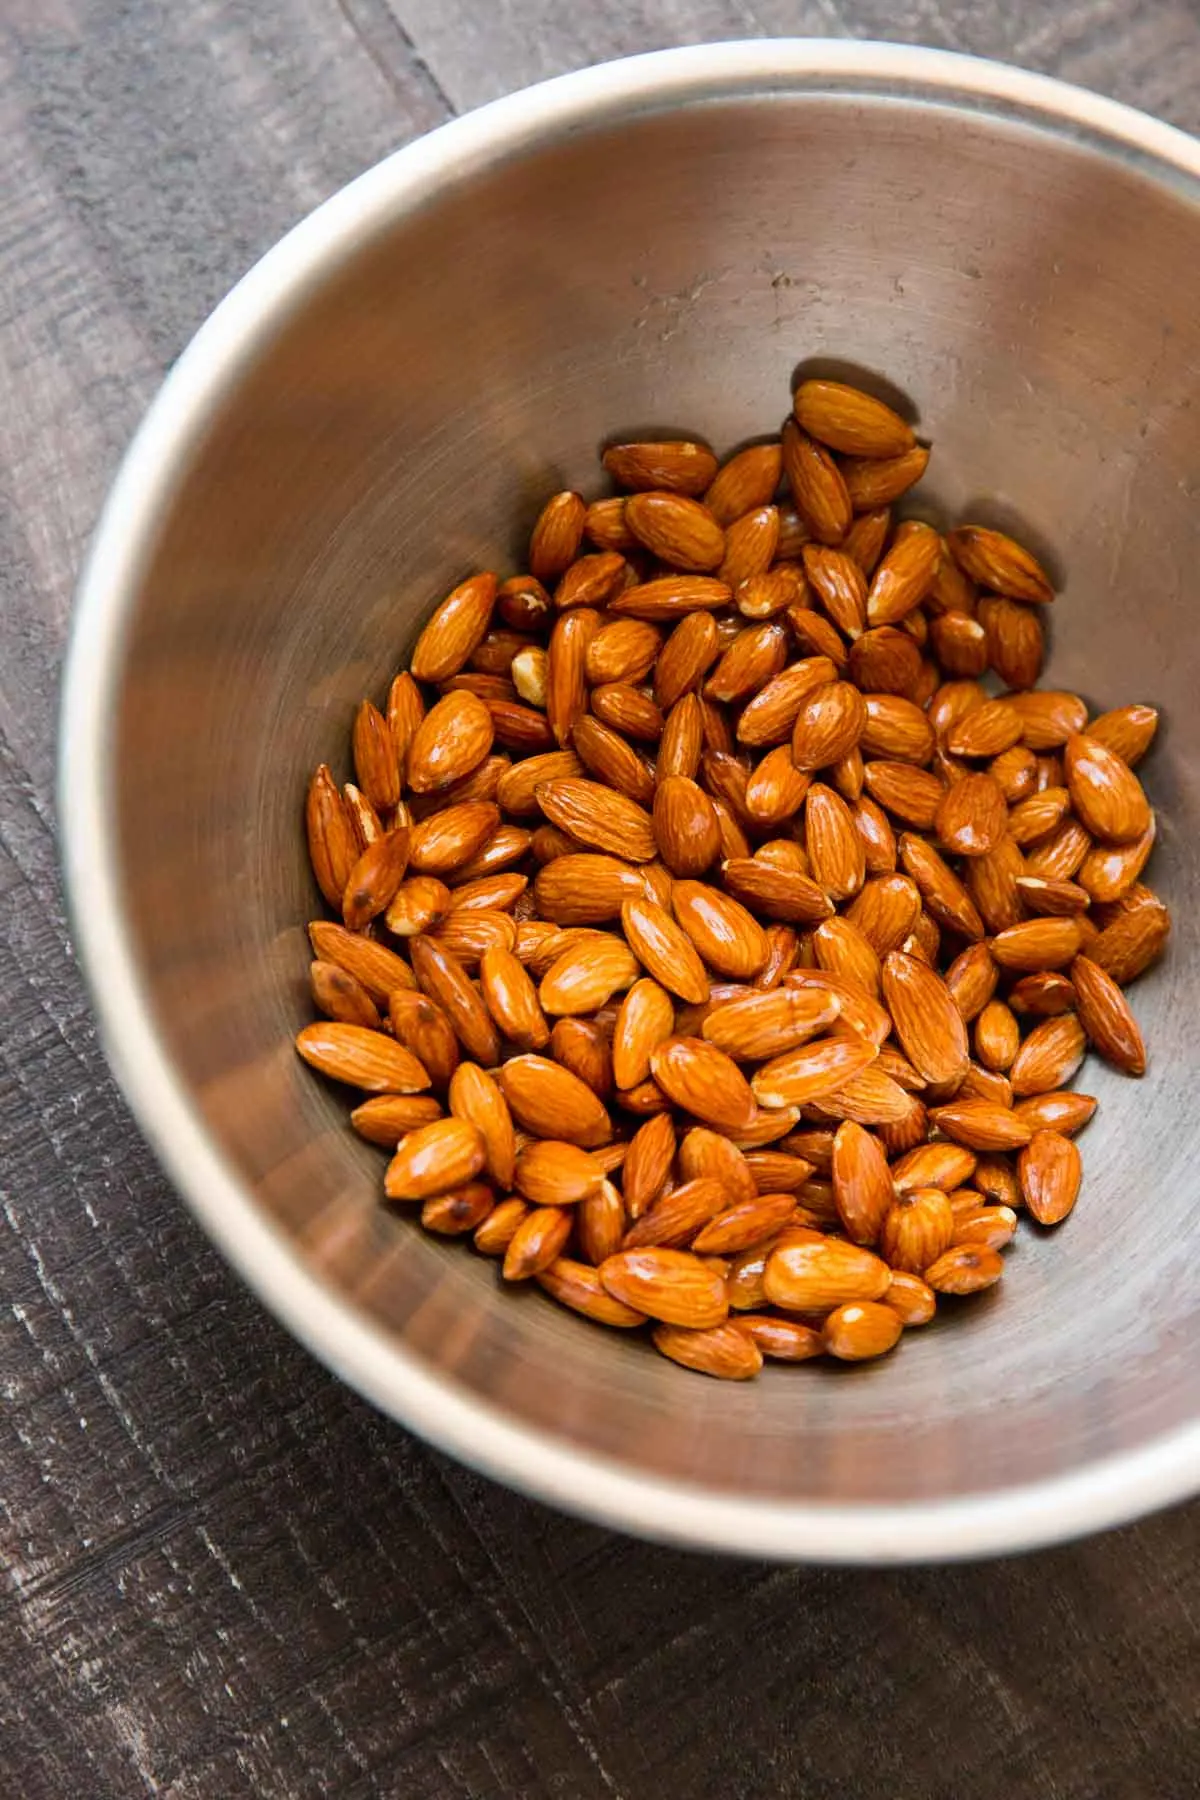 Cinnamon Toasted Almonds Recipe: How to Make It